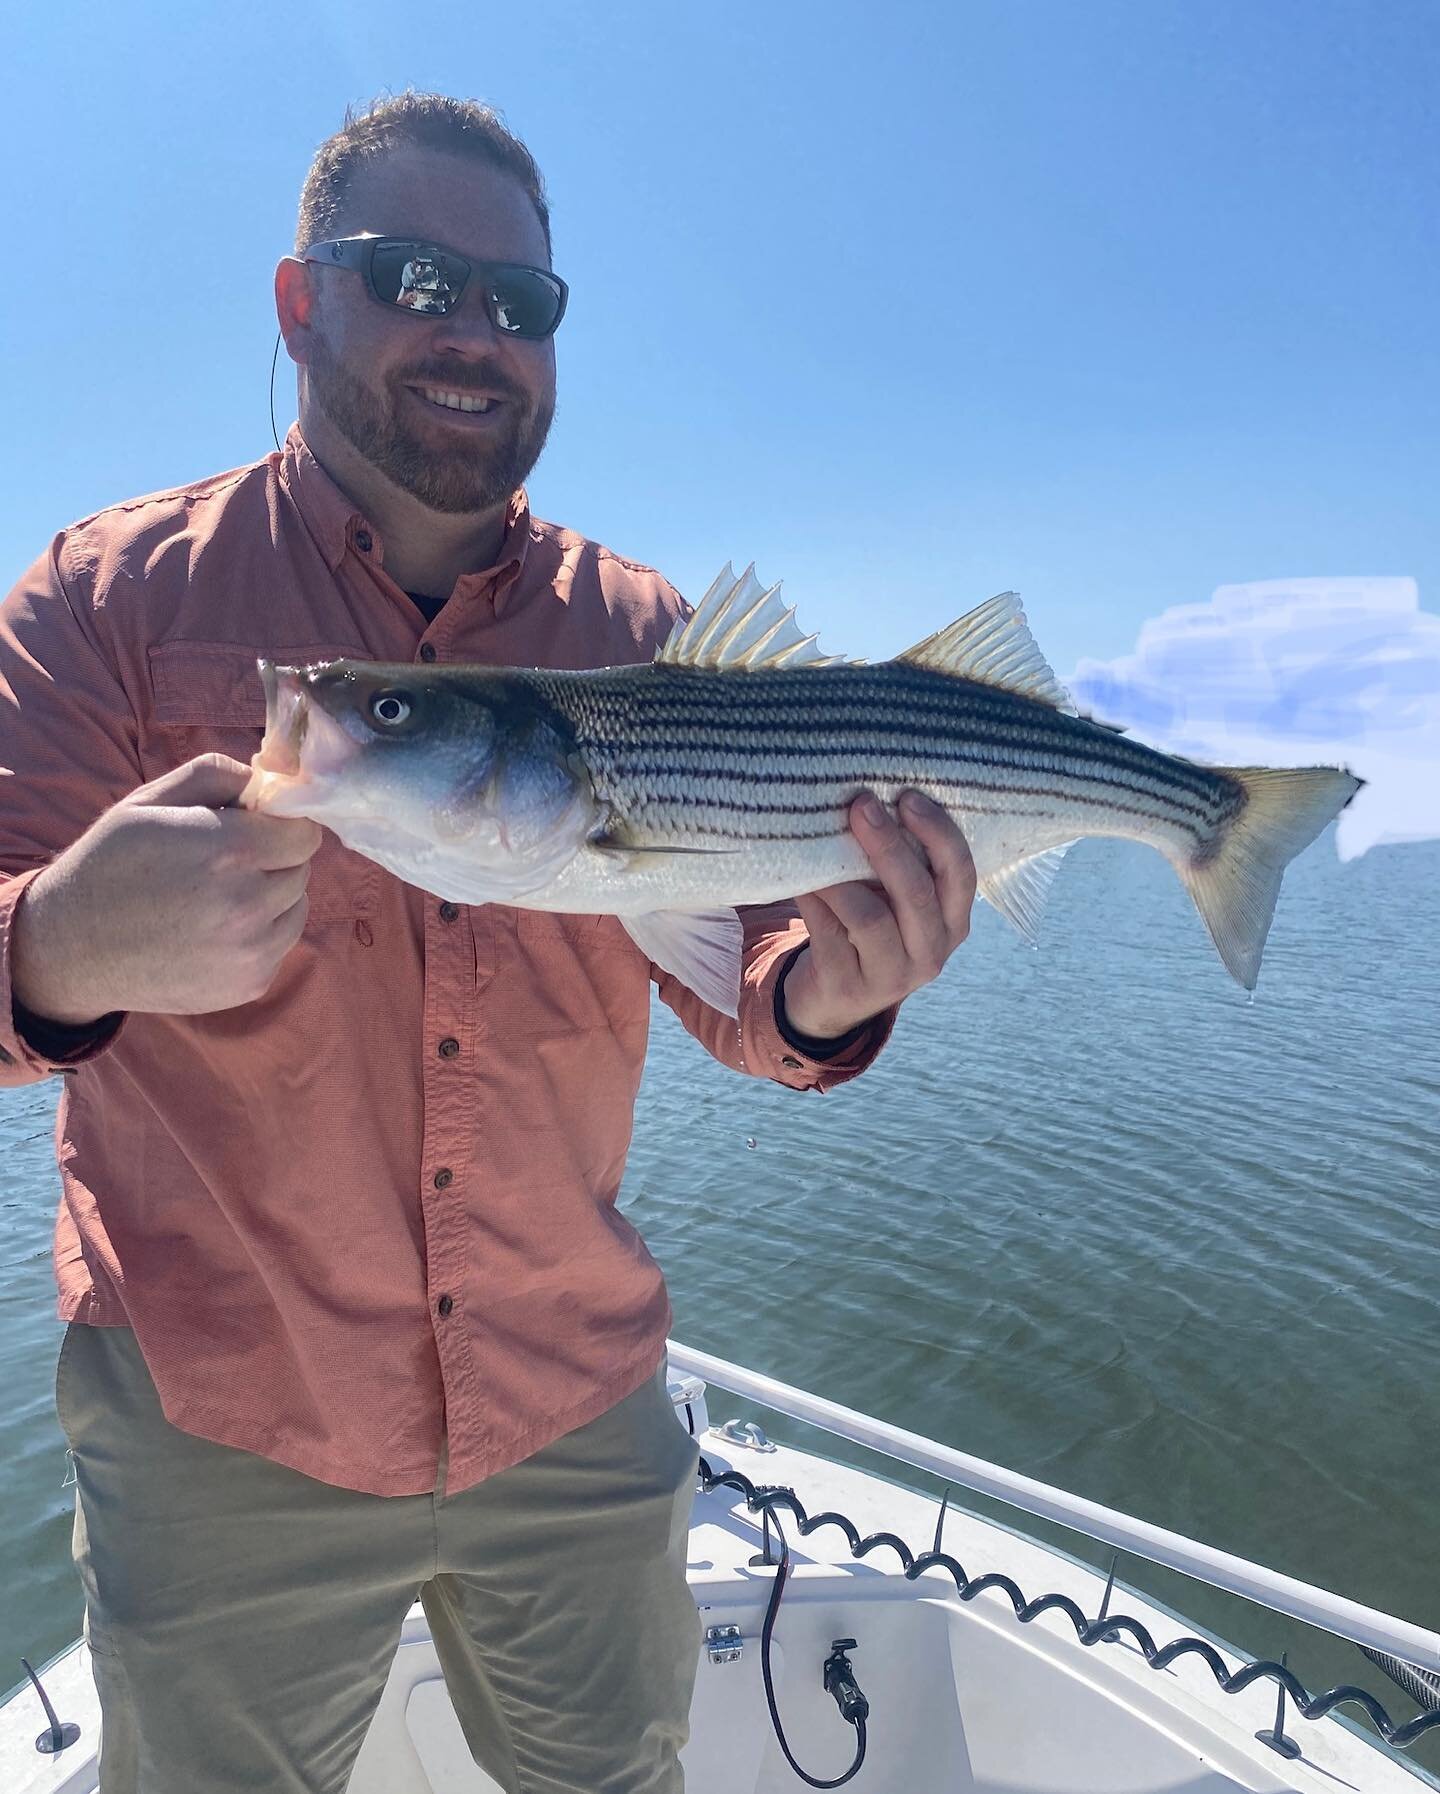 Weather fantastic but fish were a bit off in comparison to the past week. These guys were great though - caught some fish and had some laughs. #stripedbass #catchandrelease #keepfishwet #cascobay #coltonflyrods #orvisflyfishing #rockandsandcharters #